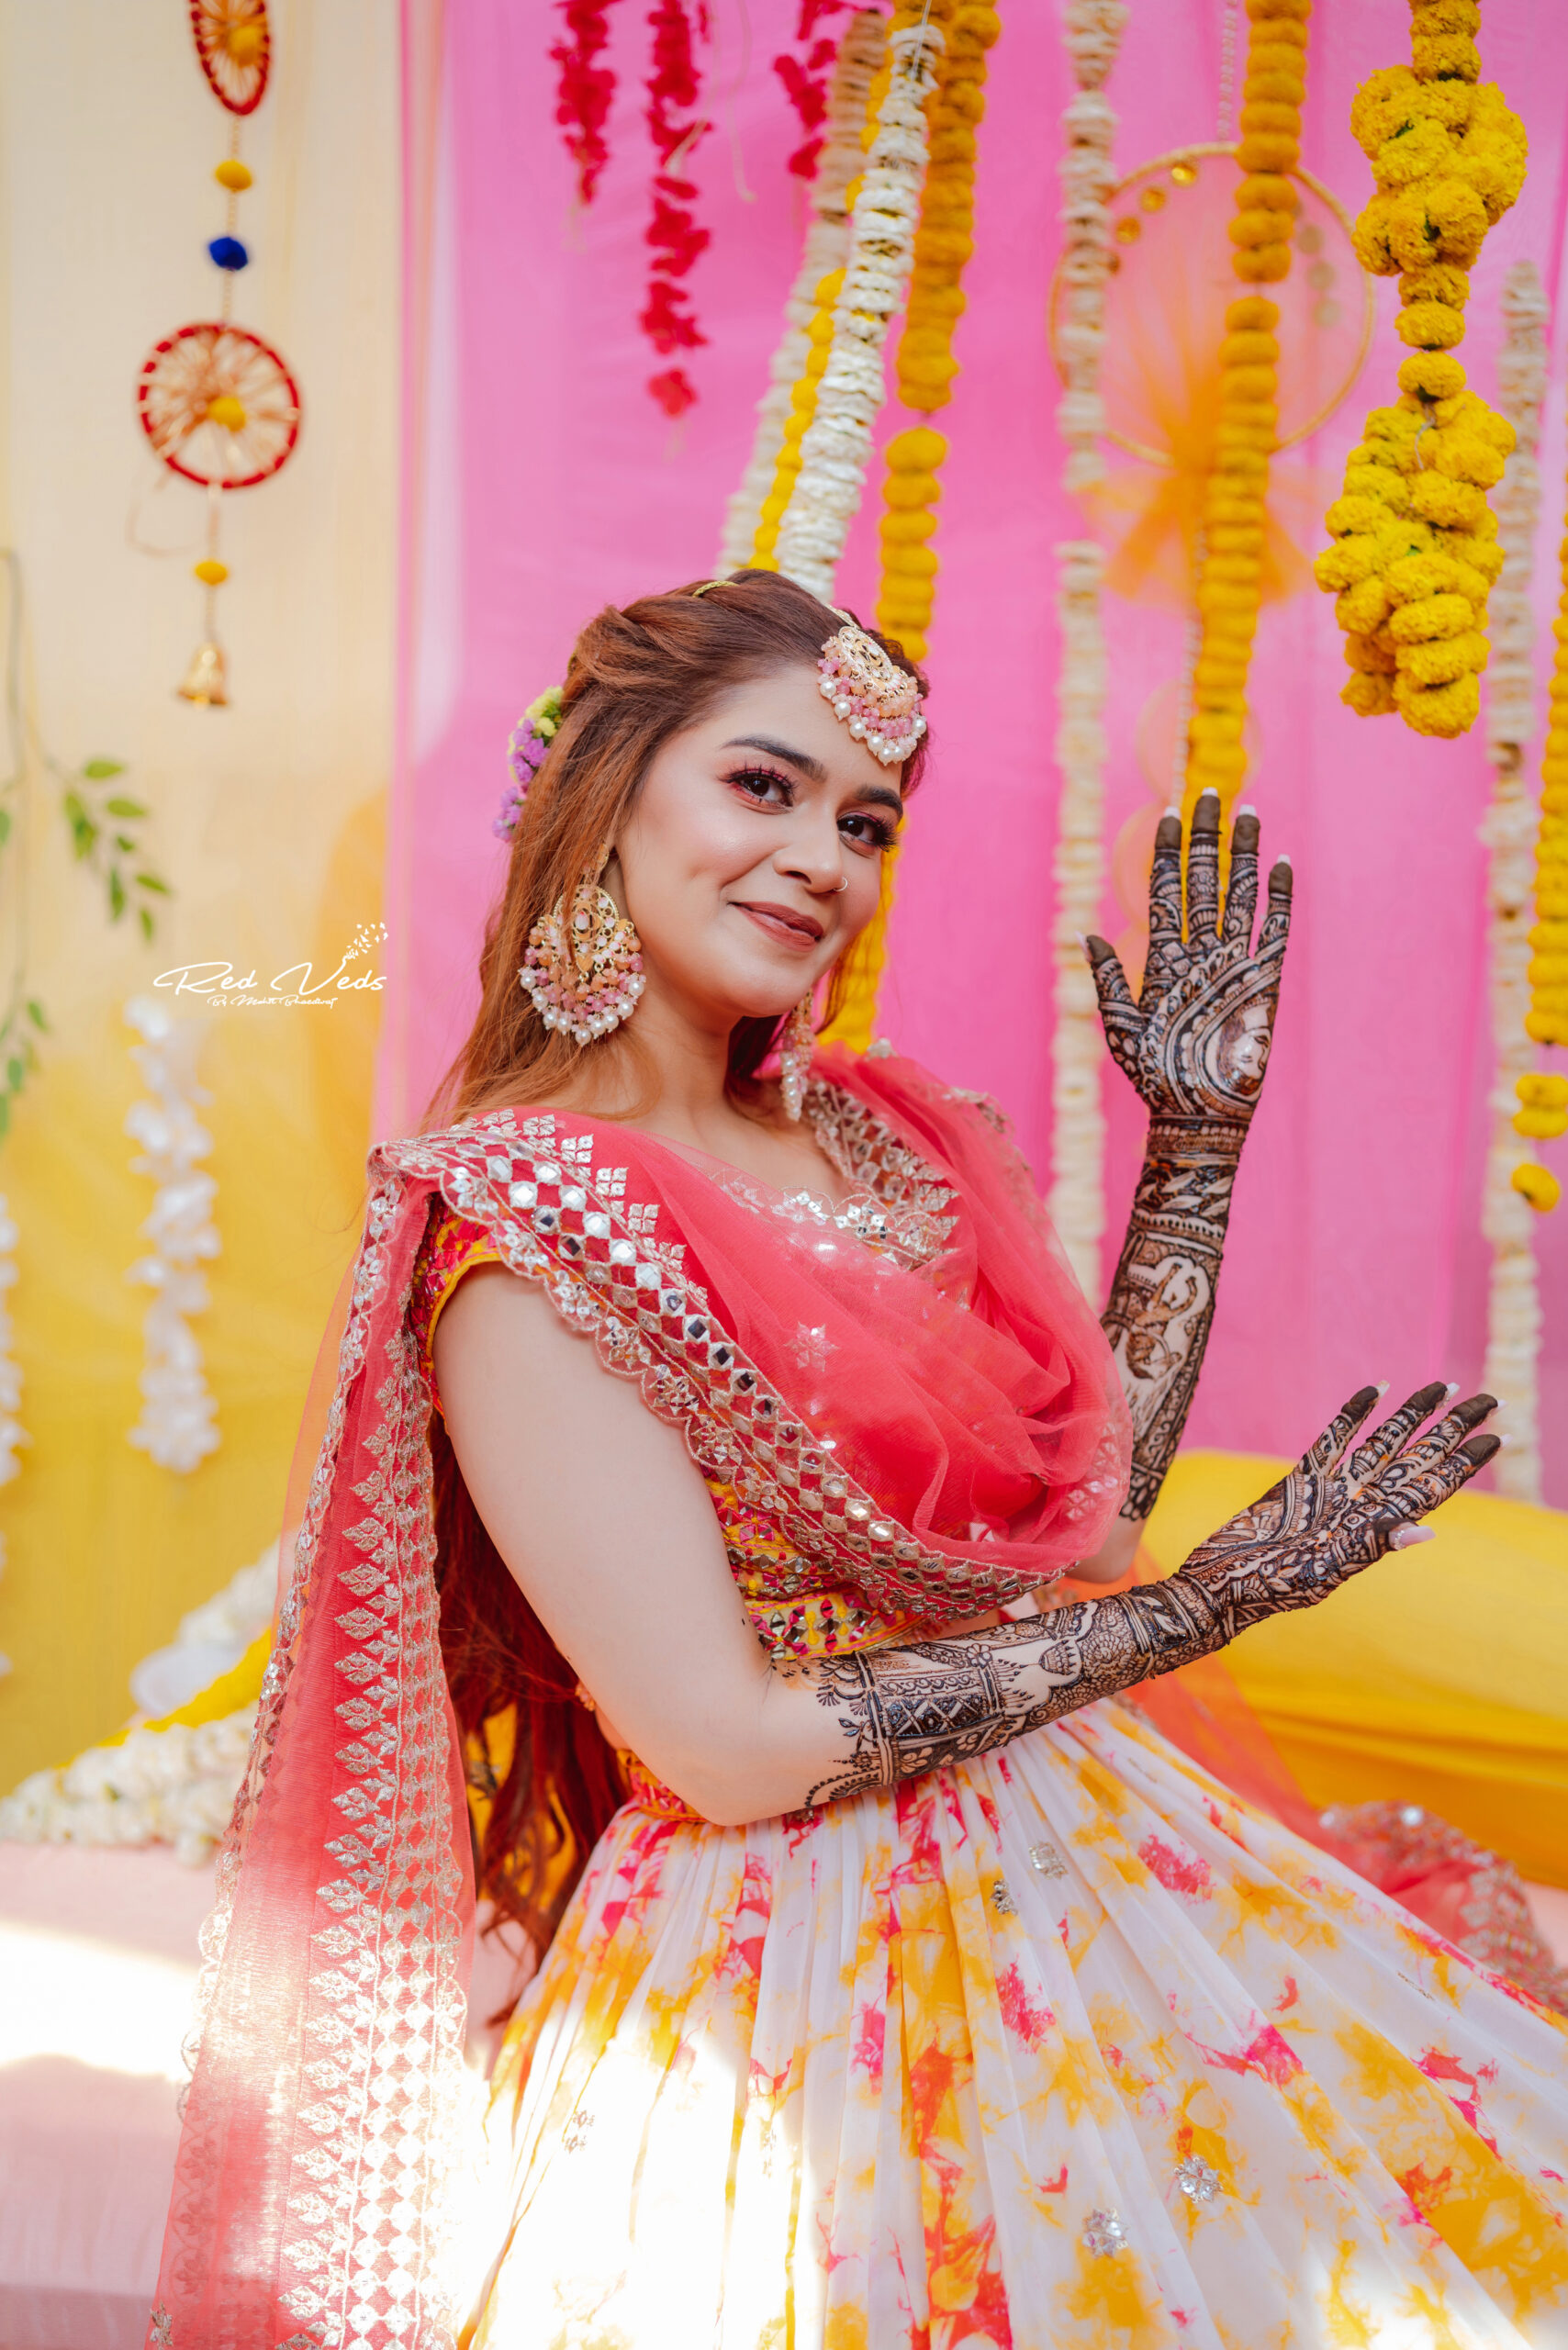 Photo of Bride showing off traditional bridal mehendi | Bridal mehendi  designs wedding, Bride photography poses, Indian wedding photography